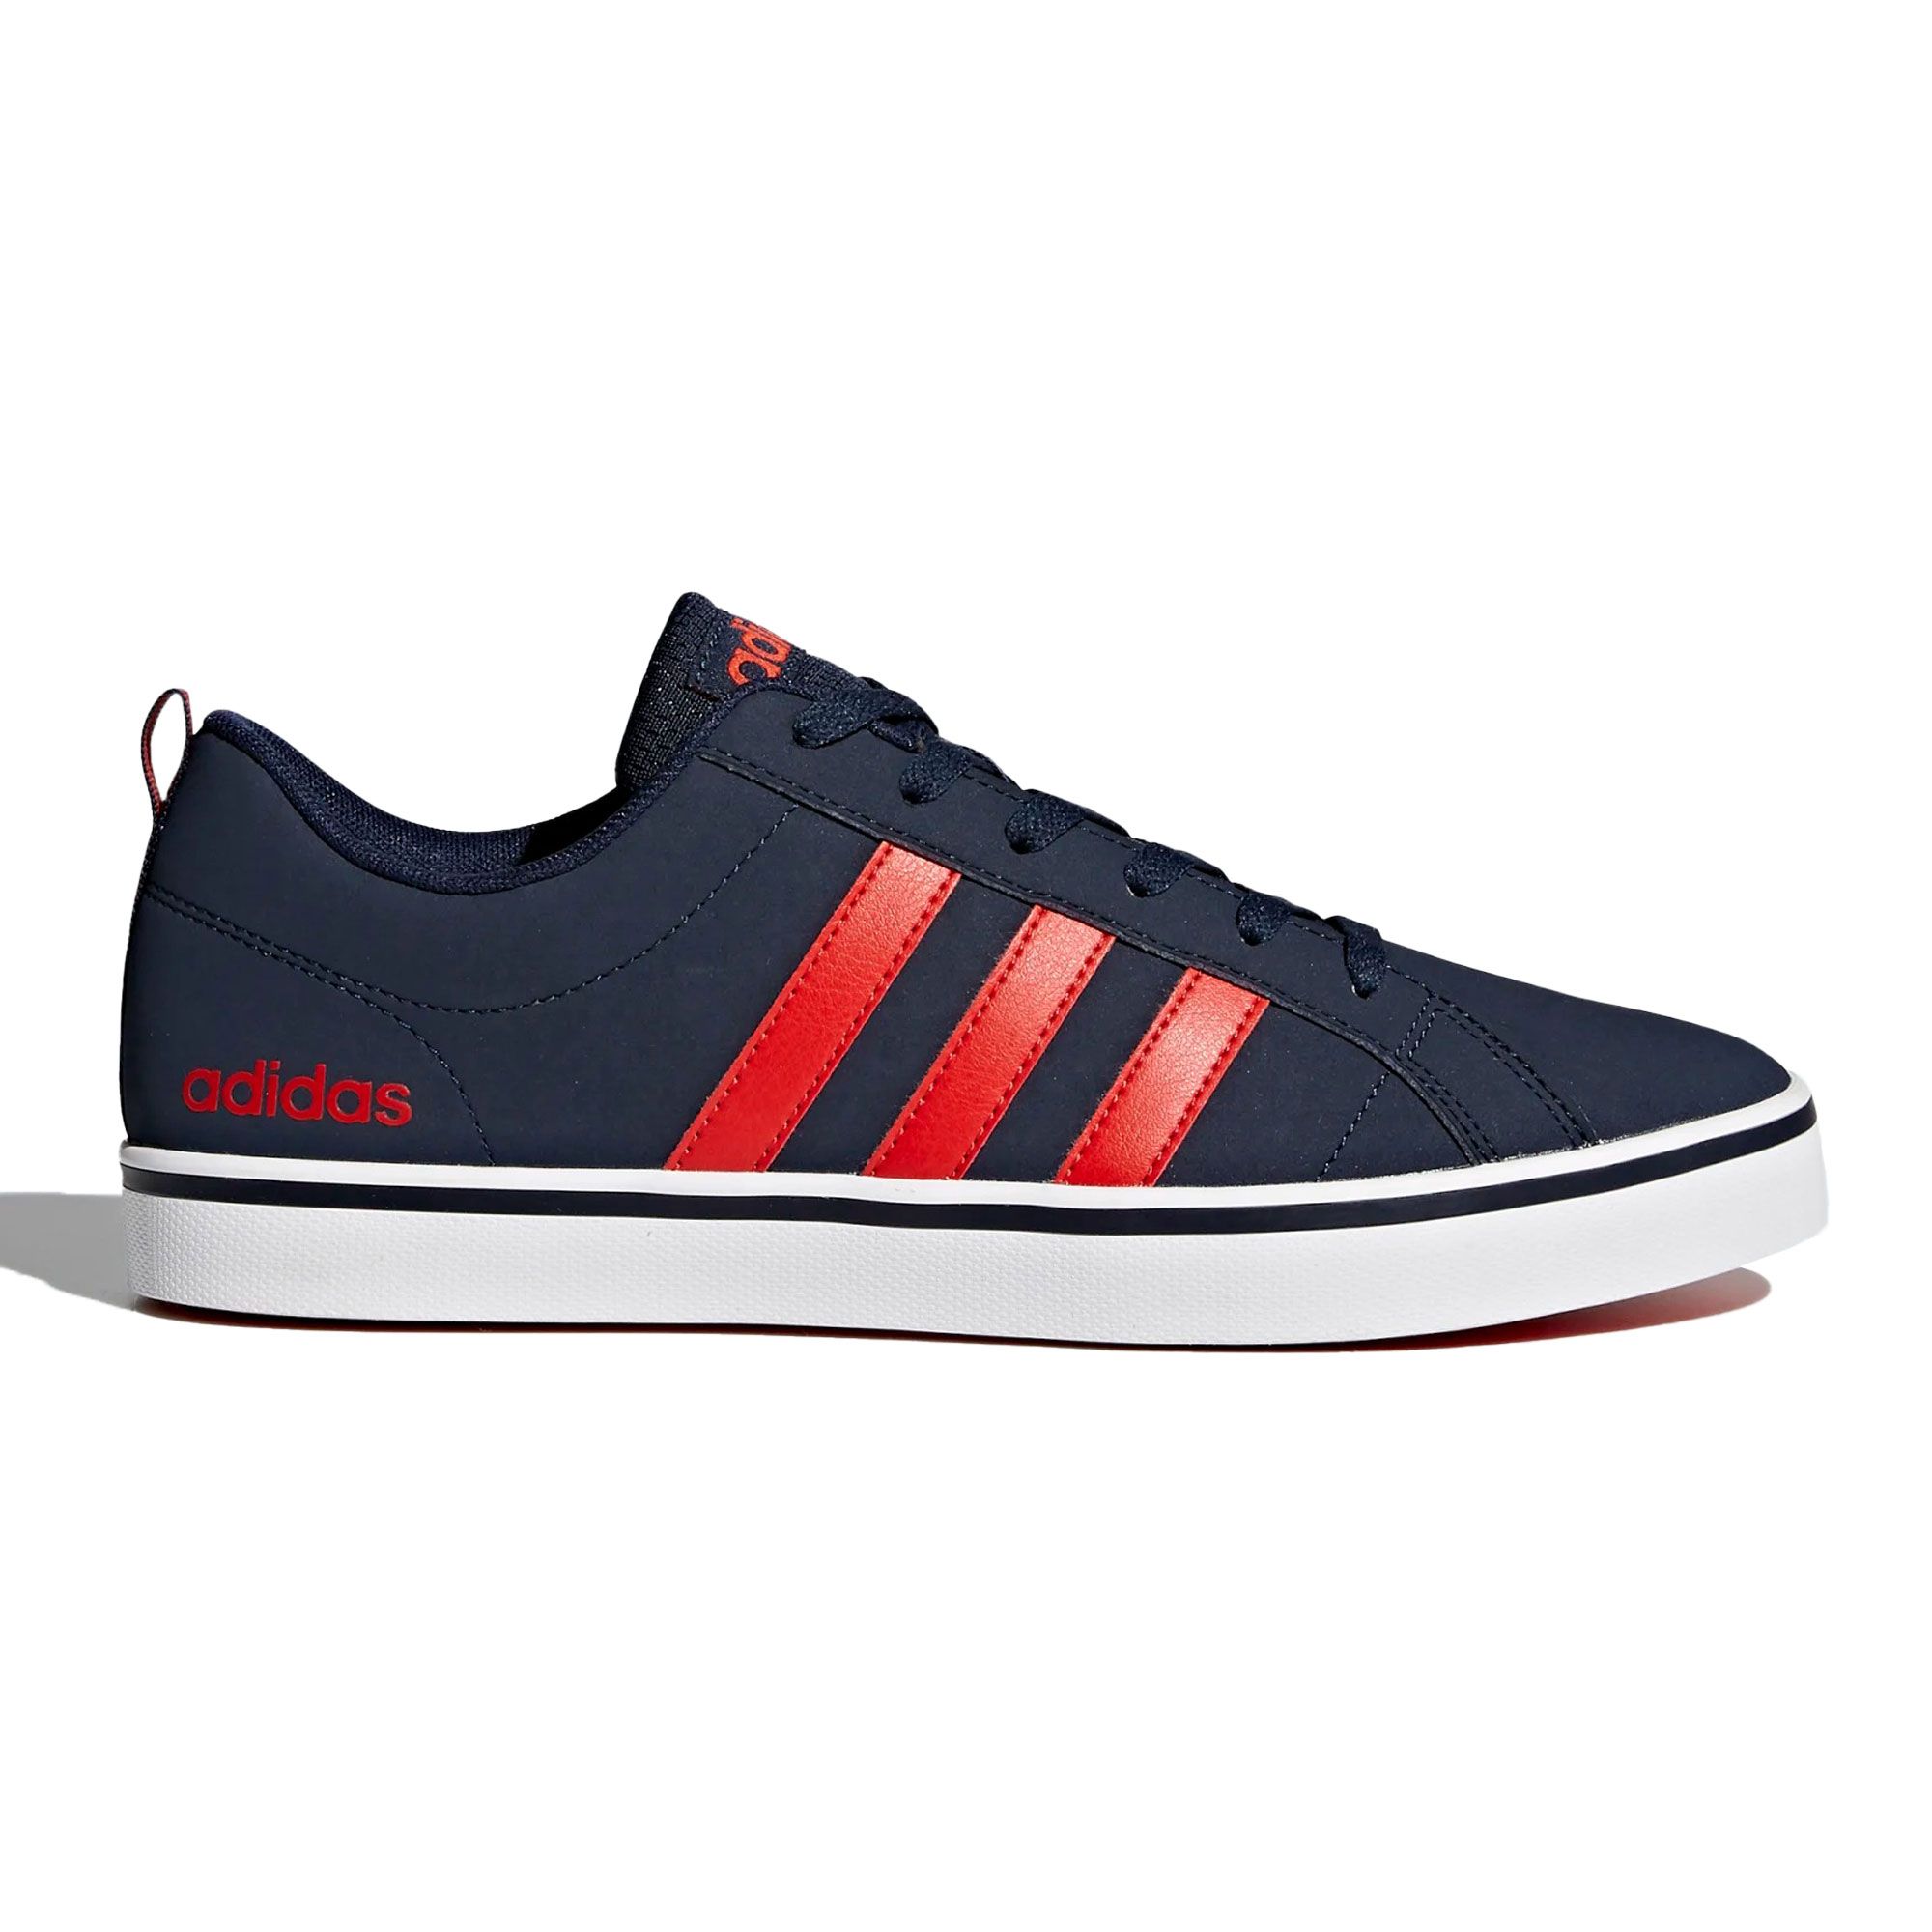 adidas | VS PACE 2.0 Boys Trainers | Low Trainers | SportsDirect.com